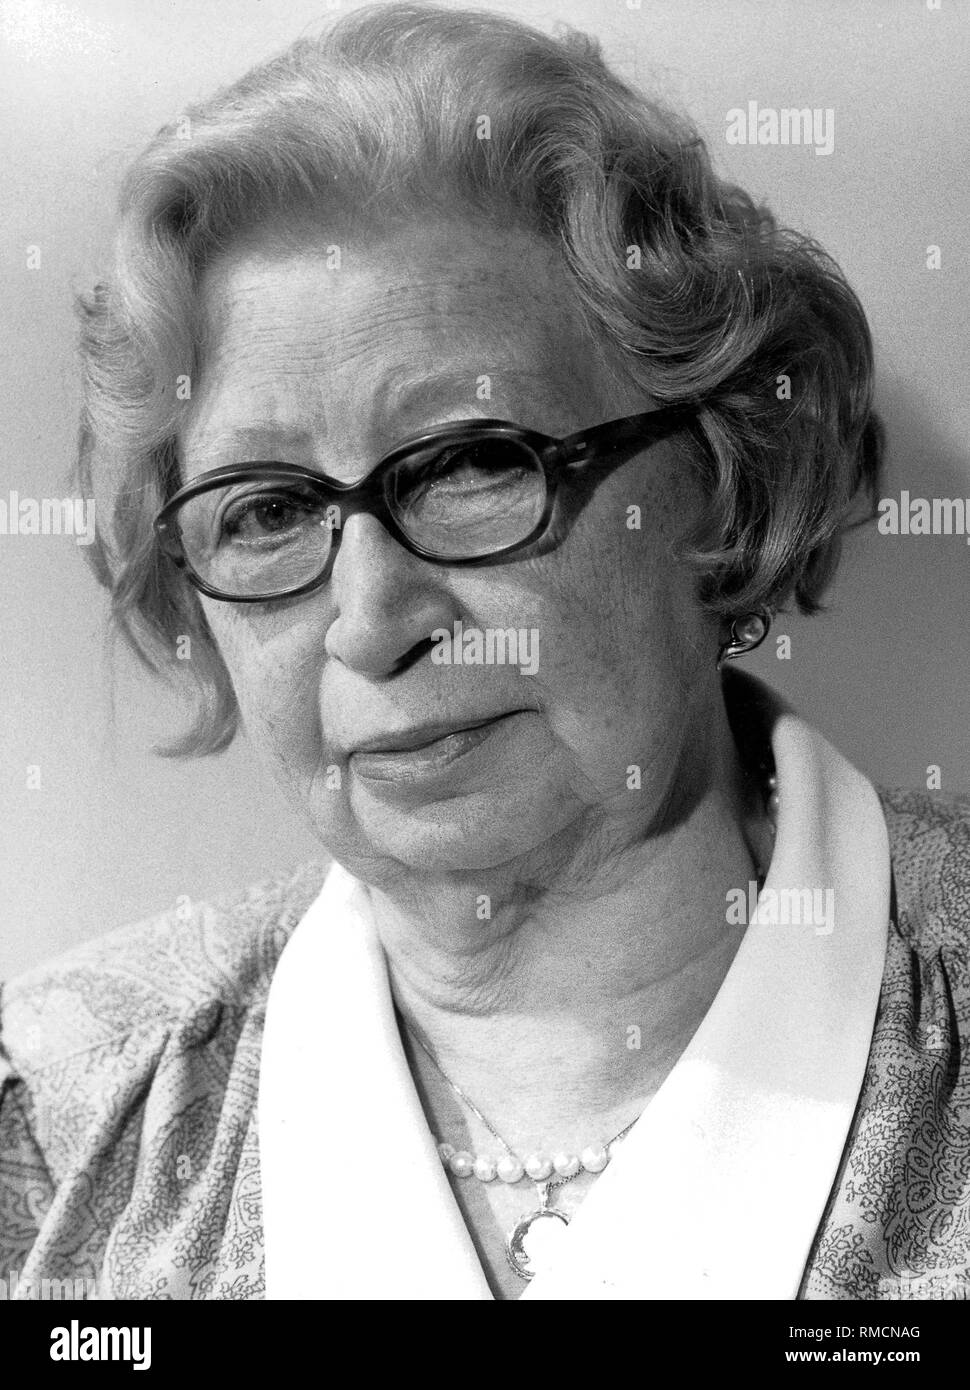 During the Second World War, Miep Gies (79) hid the Jewish girl Anne Frank from the Gestapo in her rear house in Amsterdam for 25 months - until 4 August 1944. Miep Gies today: 'We were not heroes.'It was she who saved the diary notes of the thirteen-year-old - after the war she handed over the books to Otto Frank, the only one of the family to survive the concentration camp. Today, the 'Diary of Anne Frank' is a shattering document of the charges against National Socialist terror and racism. Anne Frank died in 1945 in the Bergen-Belsen concentration camp. Miep Gies wrote a book as well: Stock Photo